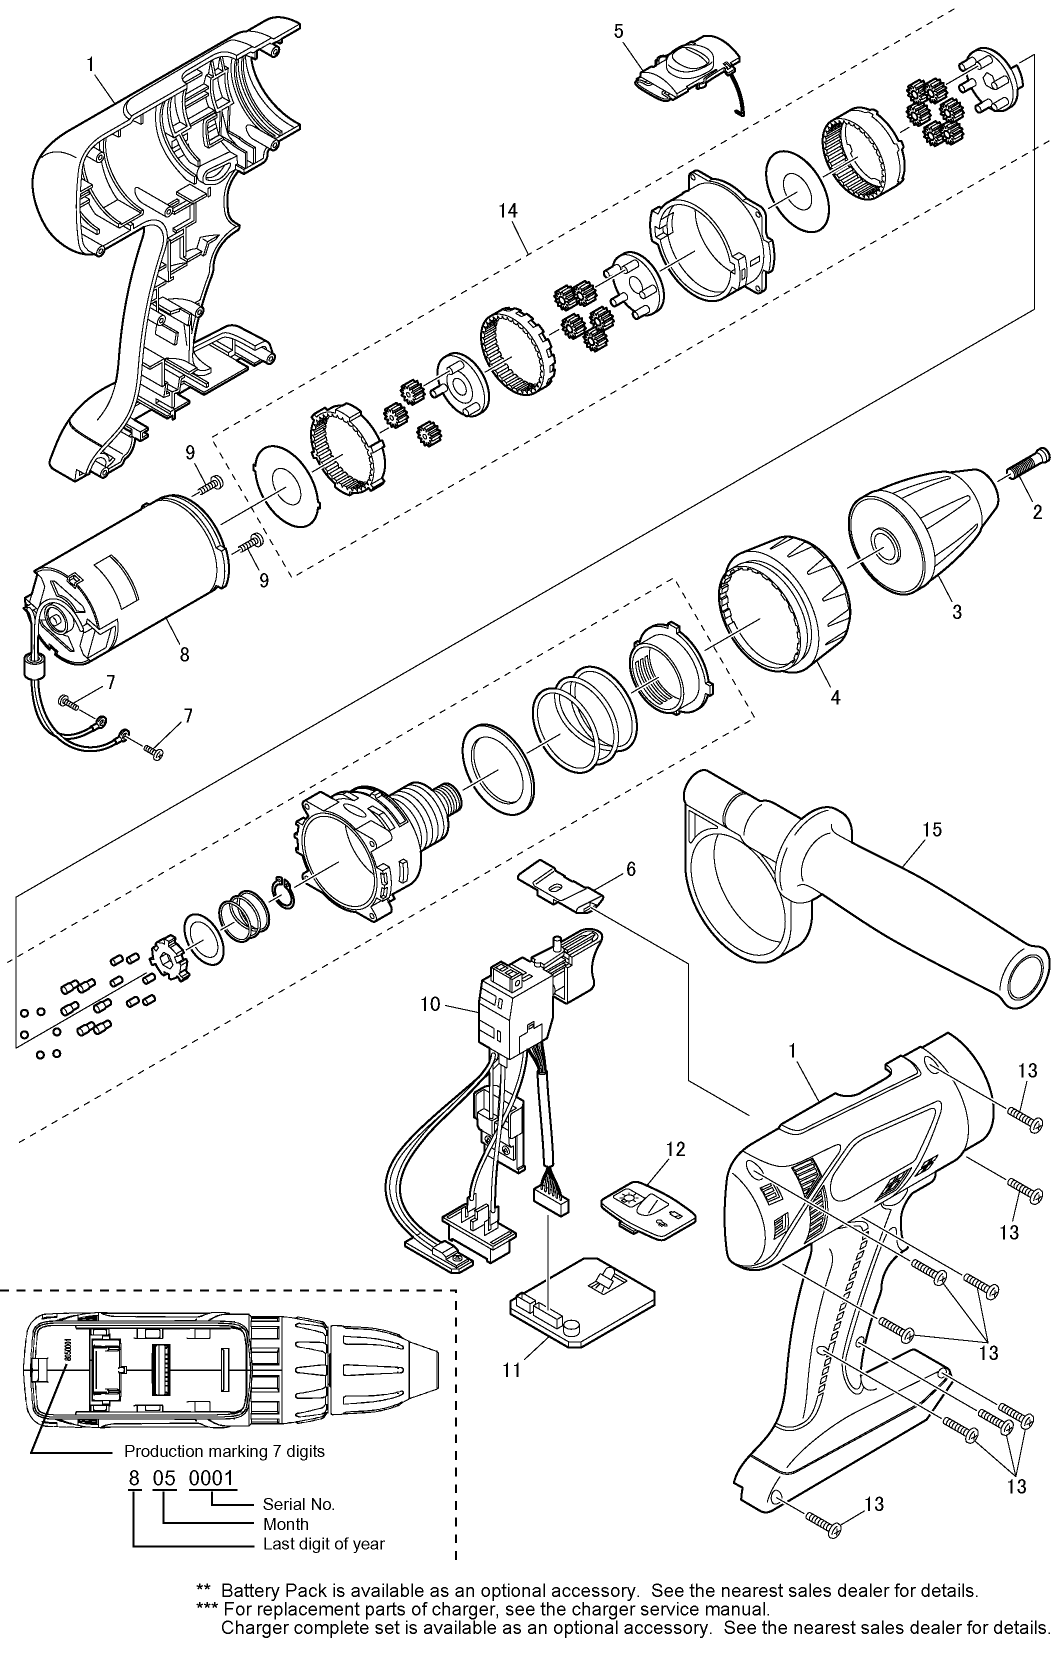 EY7460: Exploded View